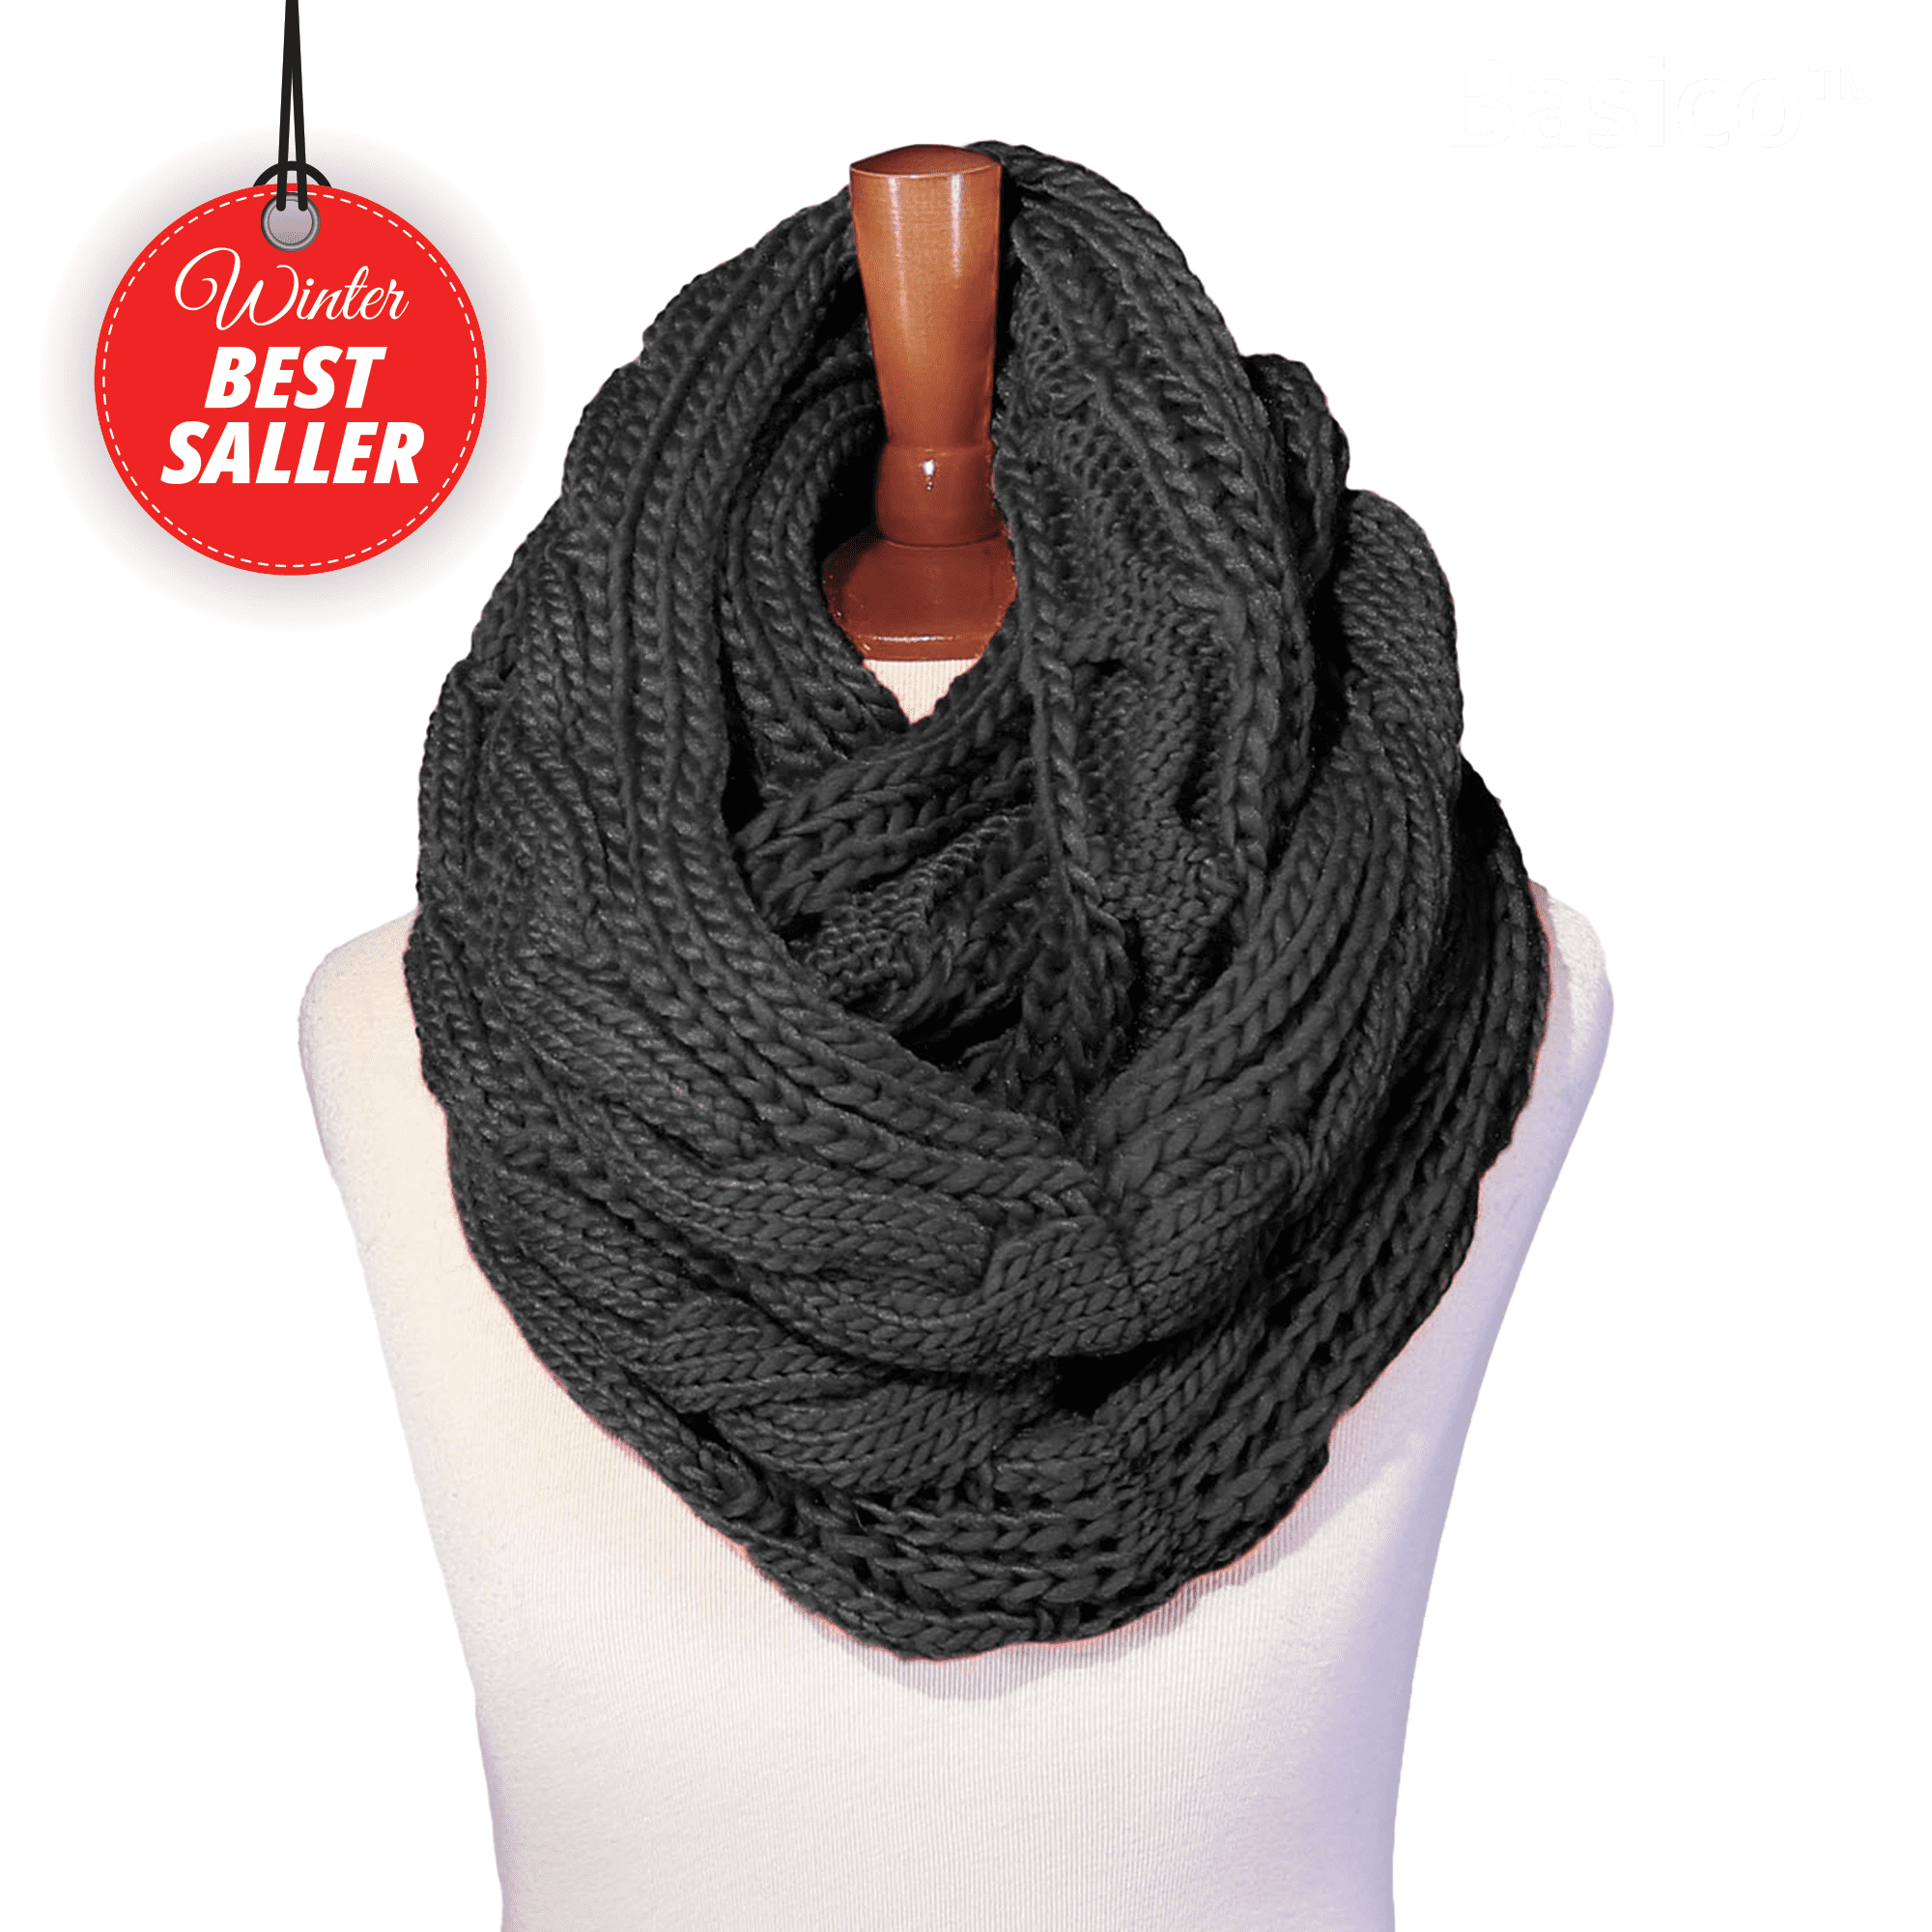 Chunky Knit scarf winter scarf Infinity Scarf warm cozy scarf 22 colors available Cozy soft scarf unisex scarf Charcoal grey scarf